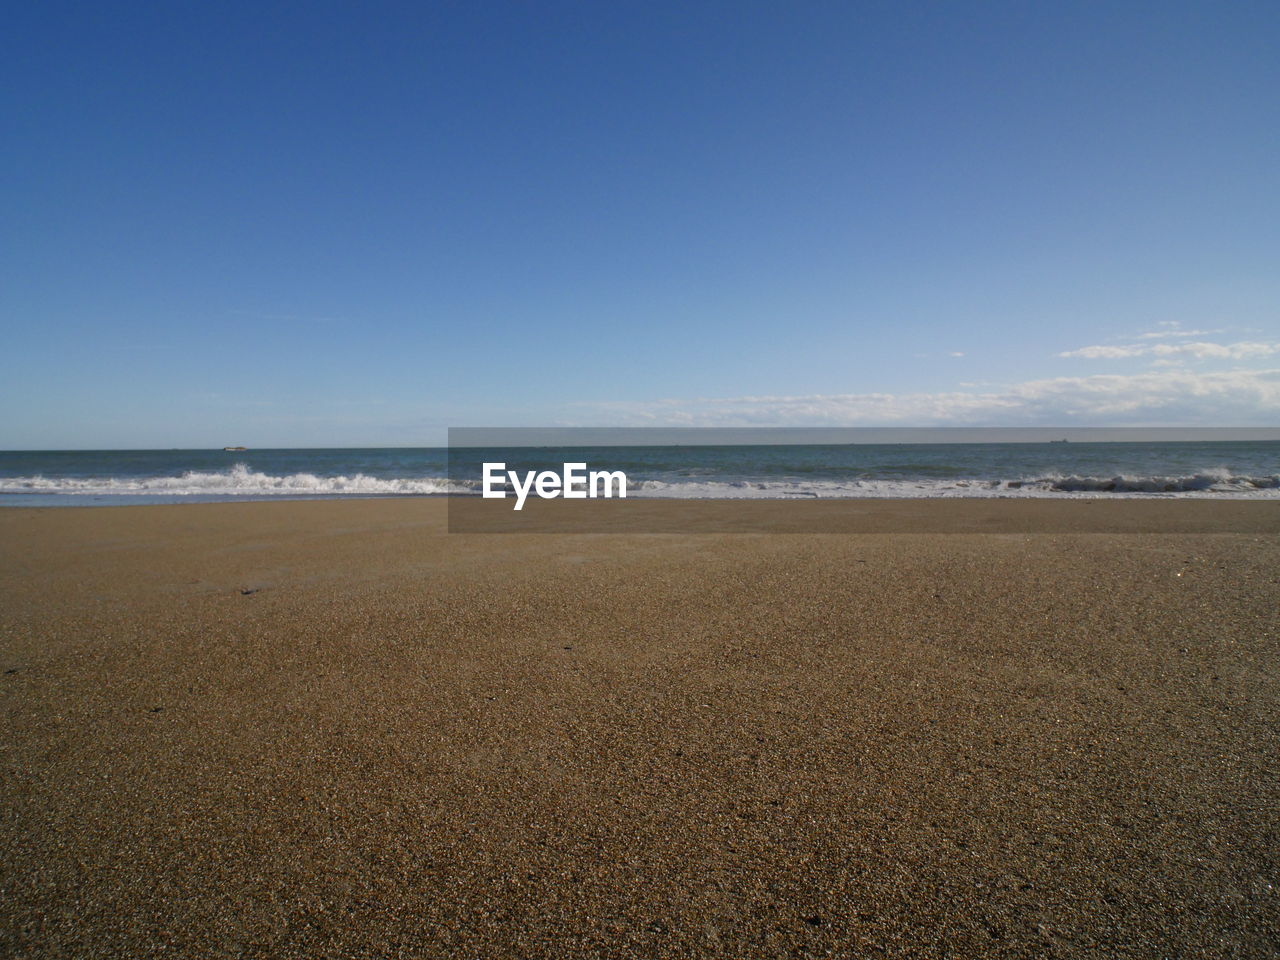 VIEW OF BEACH AGAINST CLEAR SKY